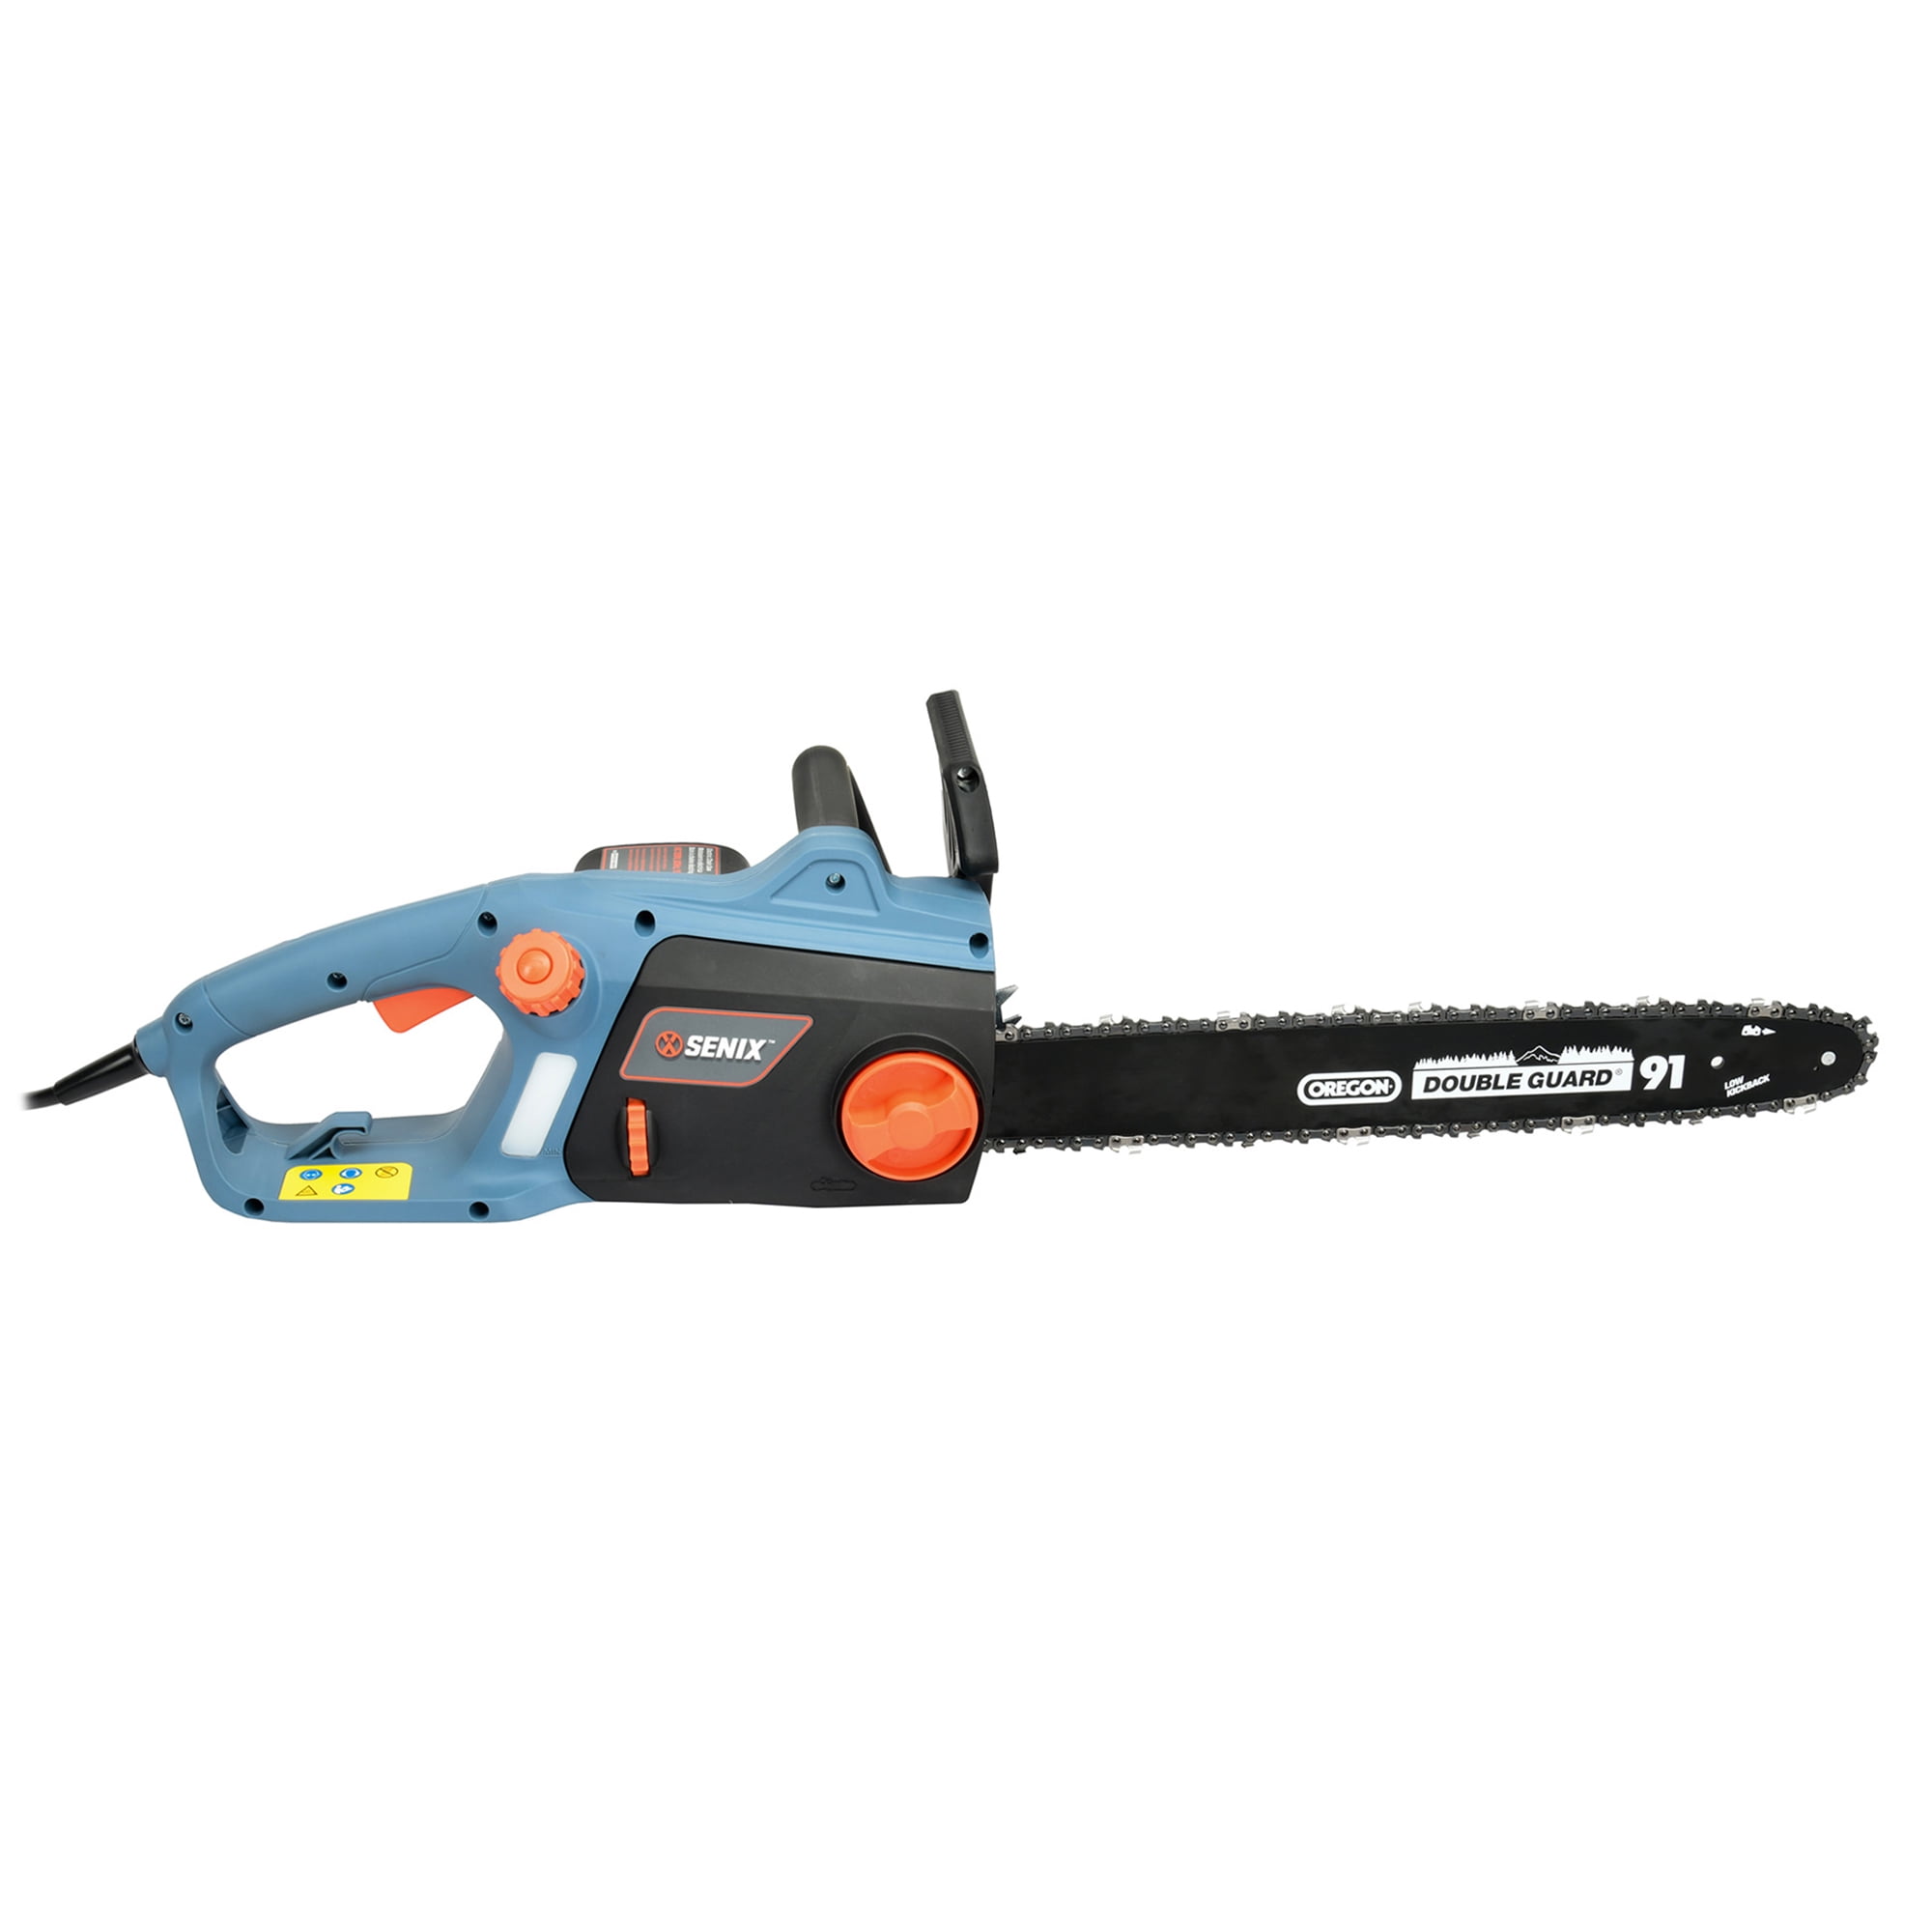 BLACK+DECKER 15 Amps 18-in Corded Electric Chainsaw at